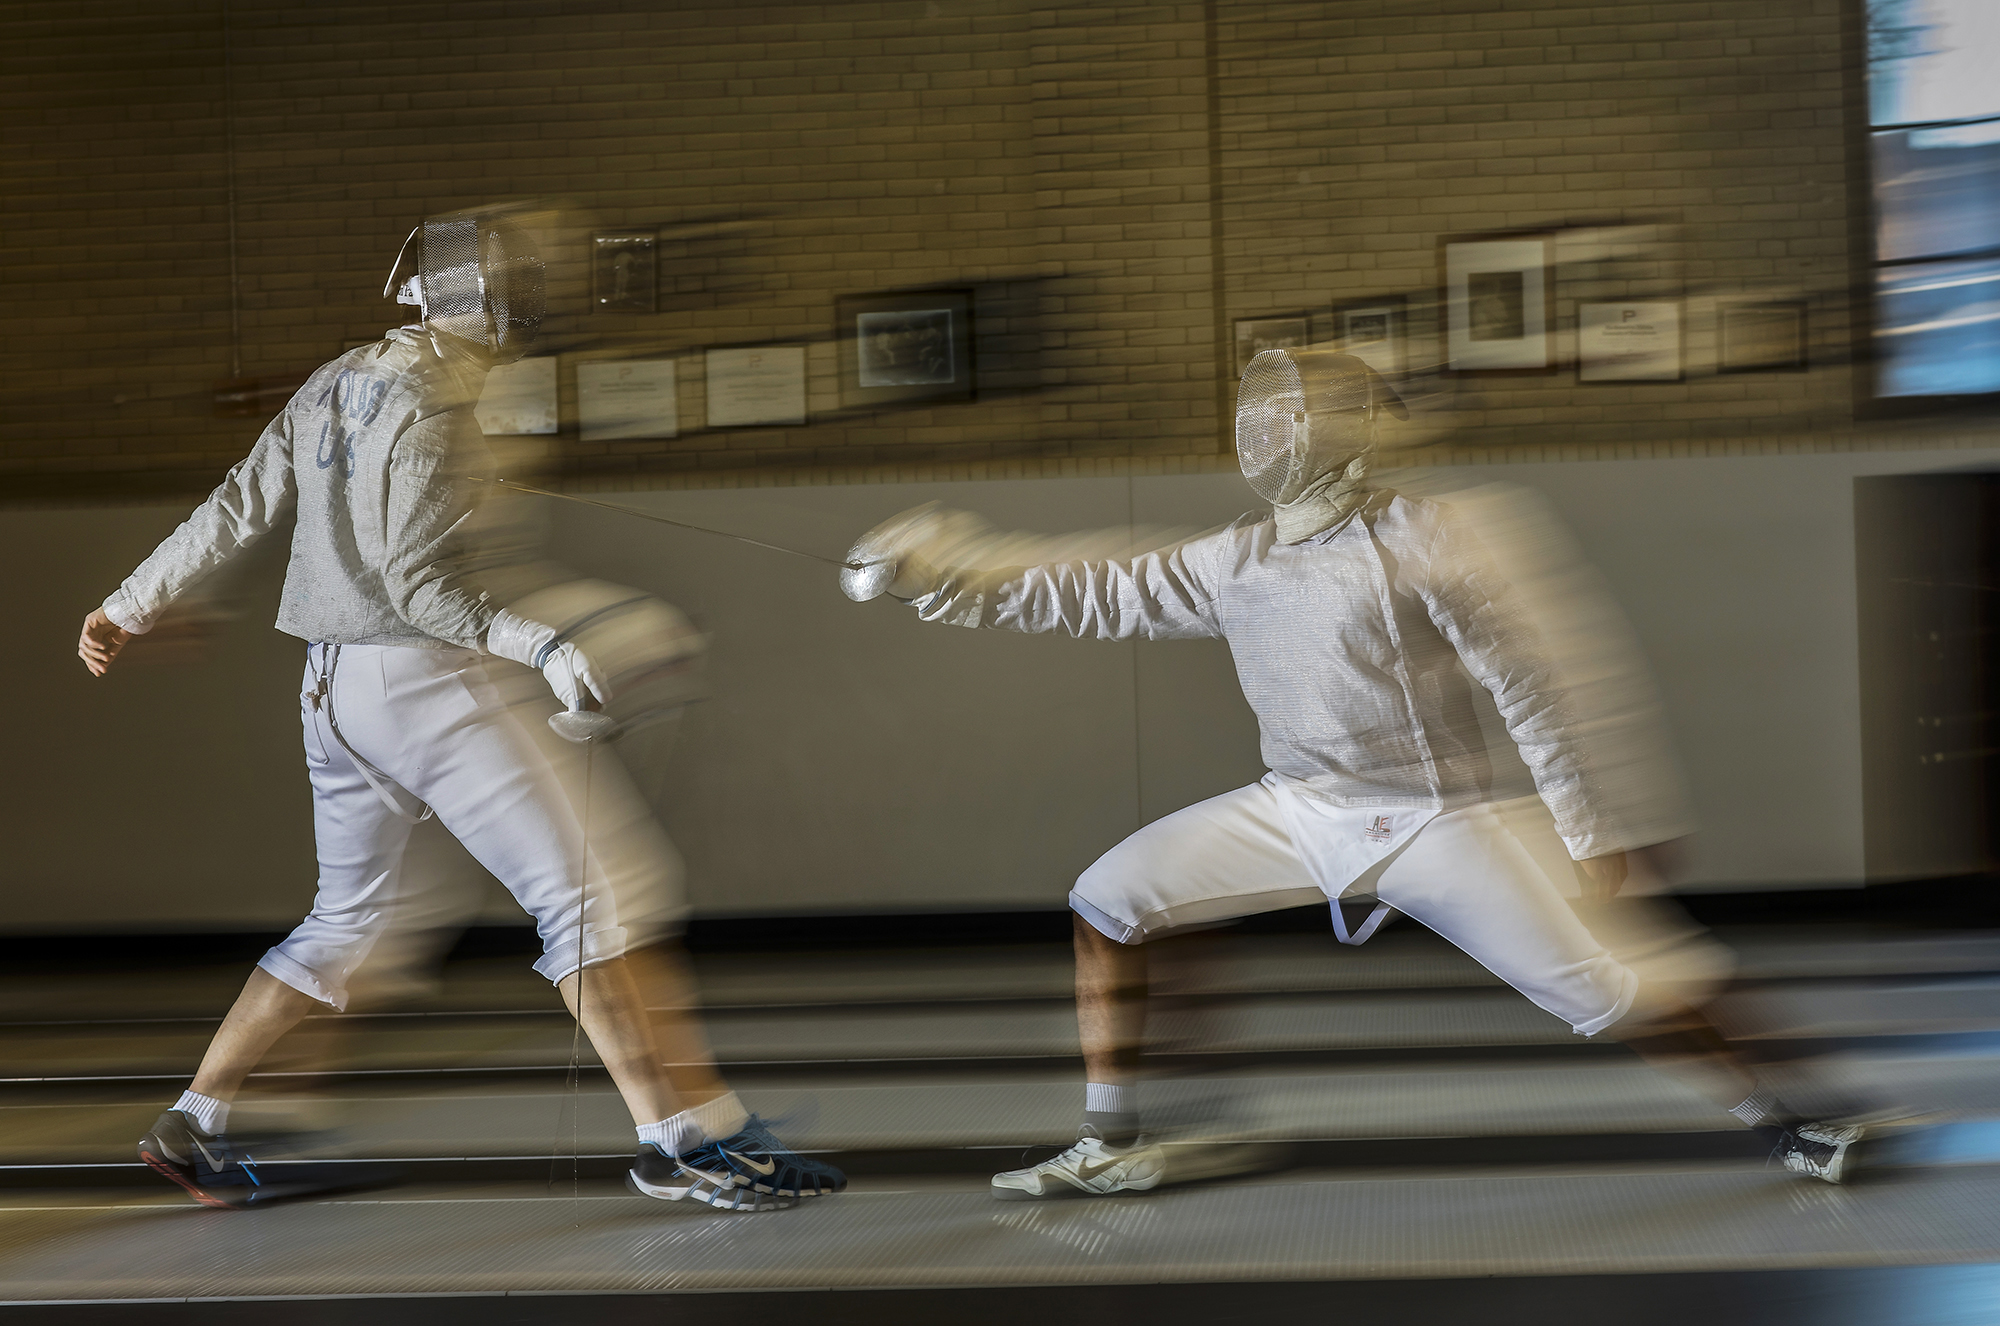 Julian Merchant, right, practices fencing with a teammate in Hutchinson Gym.